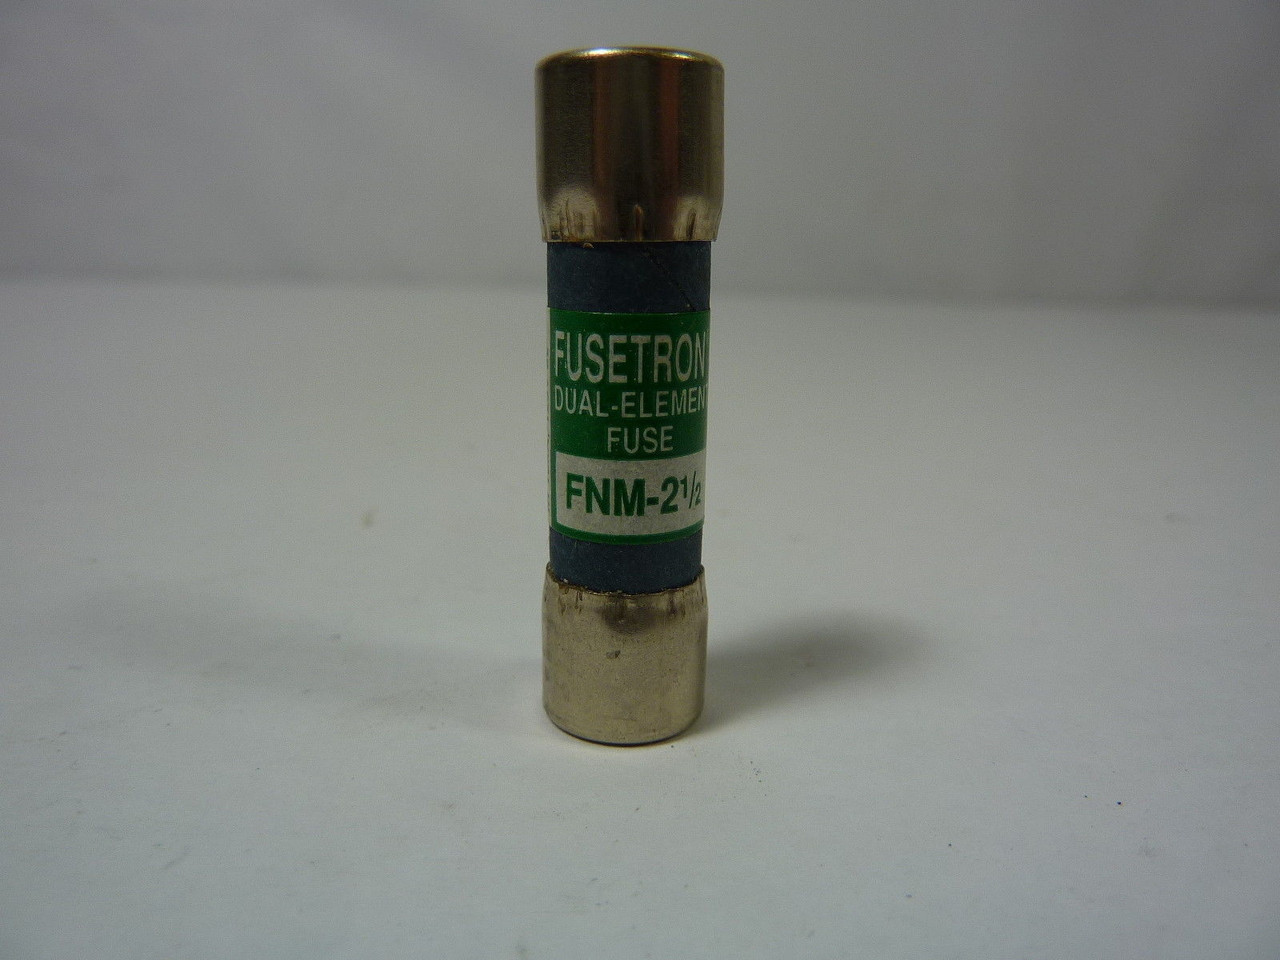 Fusetron FNM-2-1/2 Time Delay Fuse 2-1/2A 250V USED